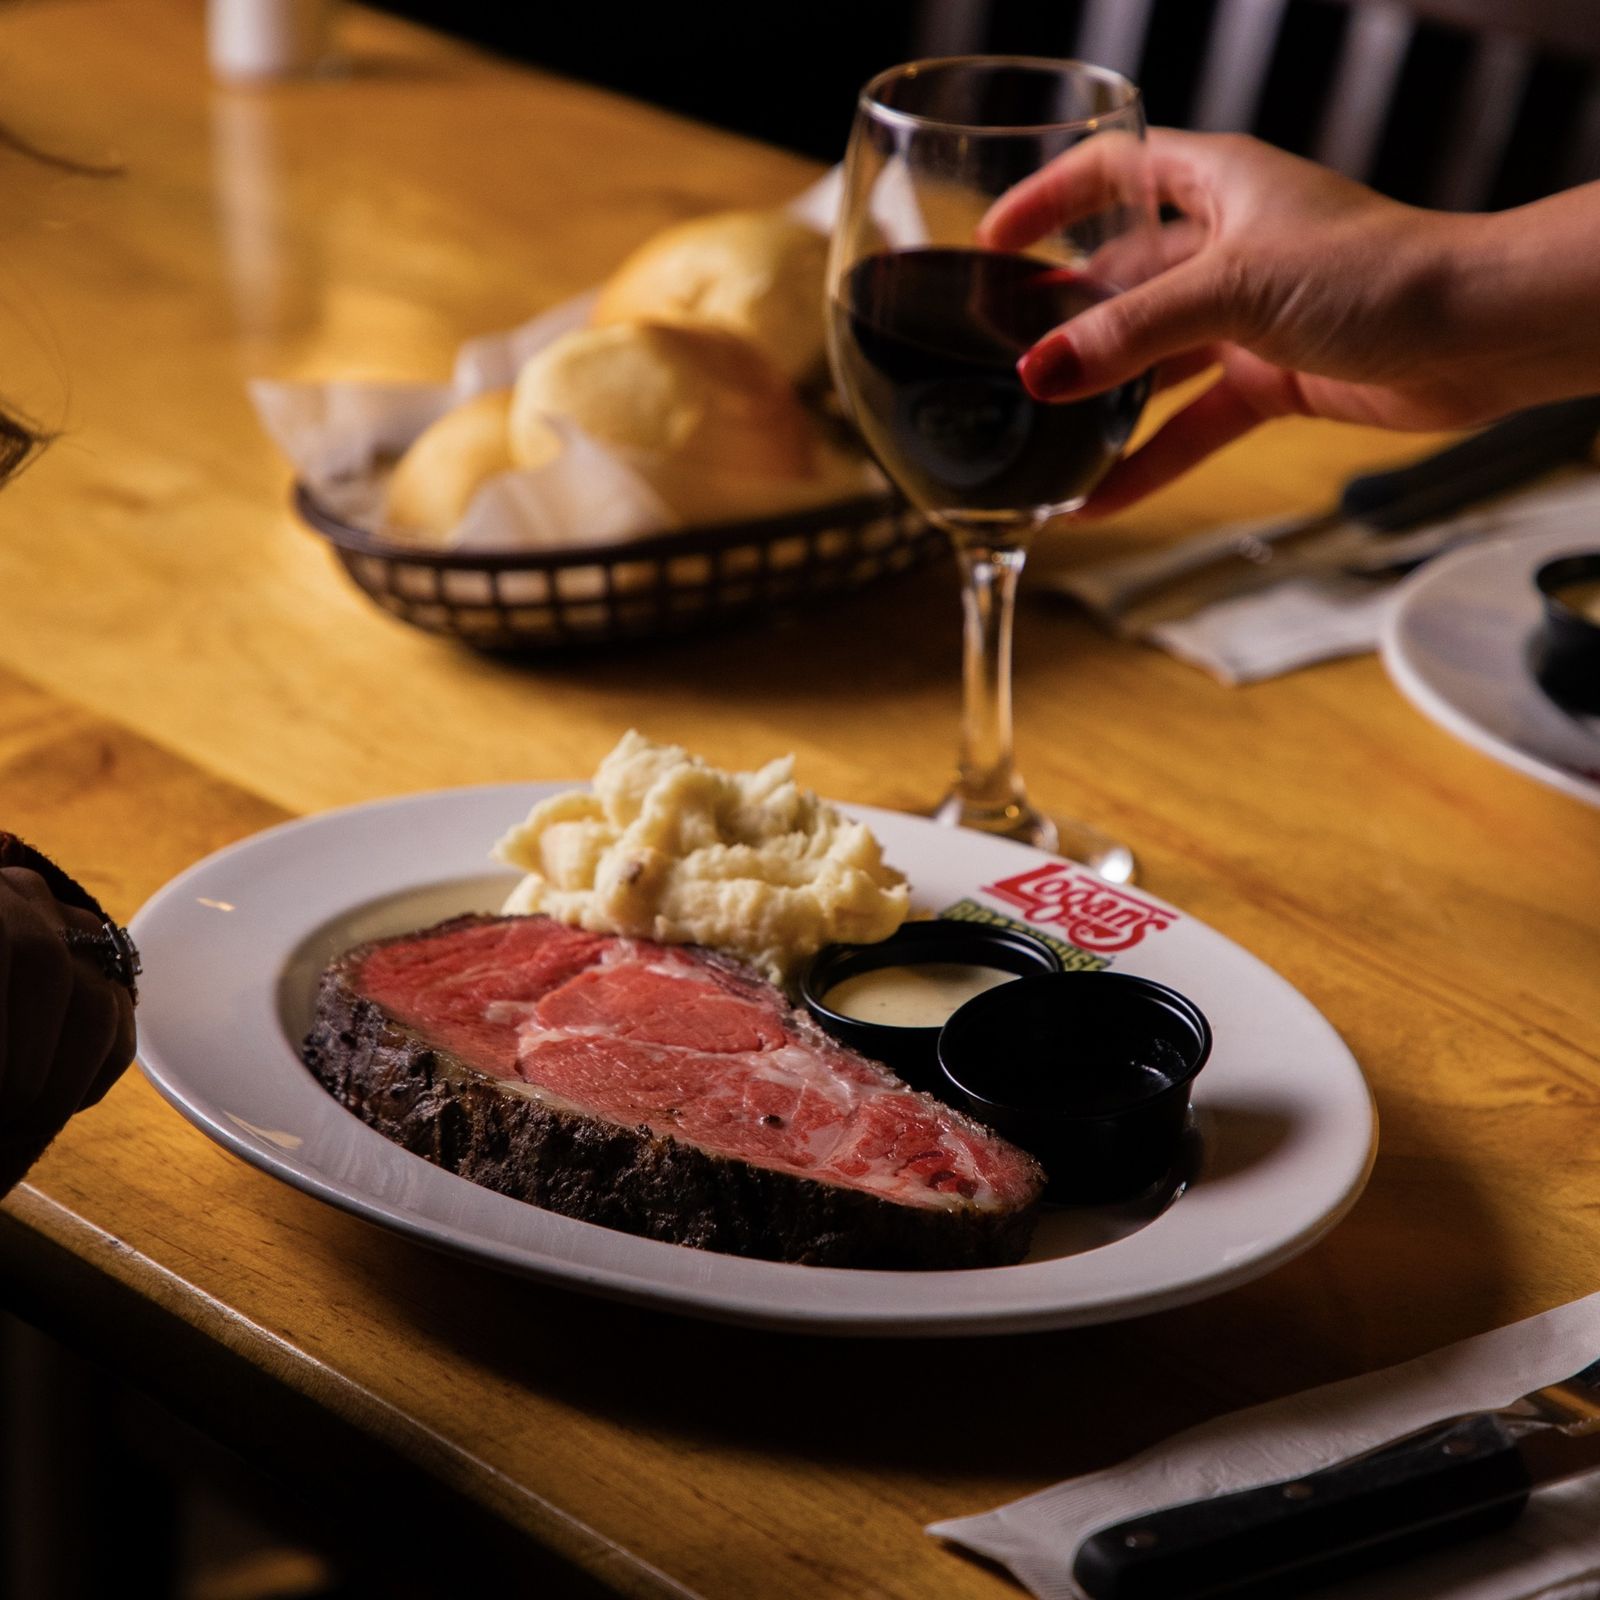 Logan's Roadhouse "Beefing" Up Holiday Offers For A Limited Time